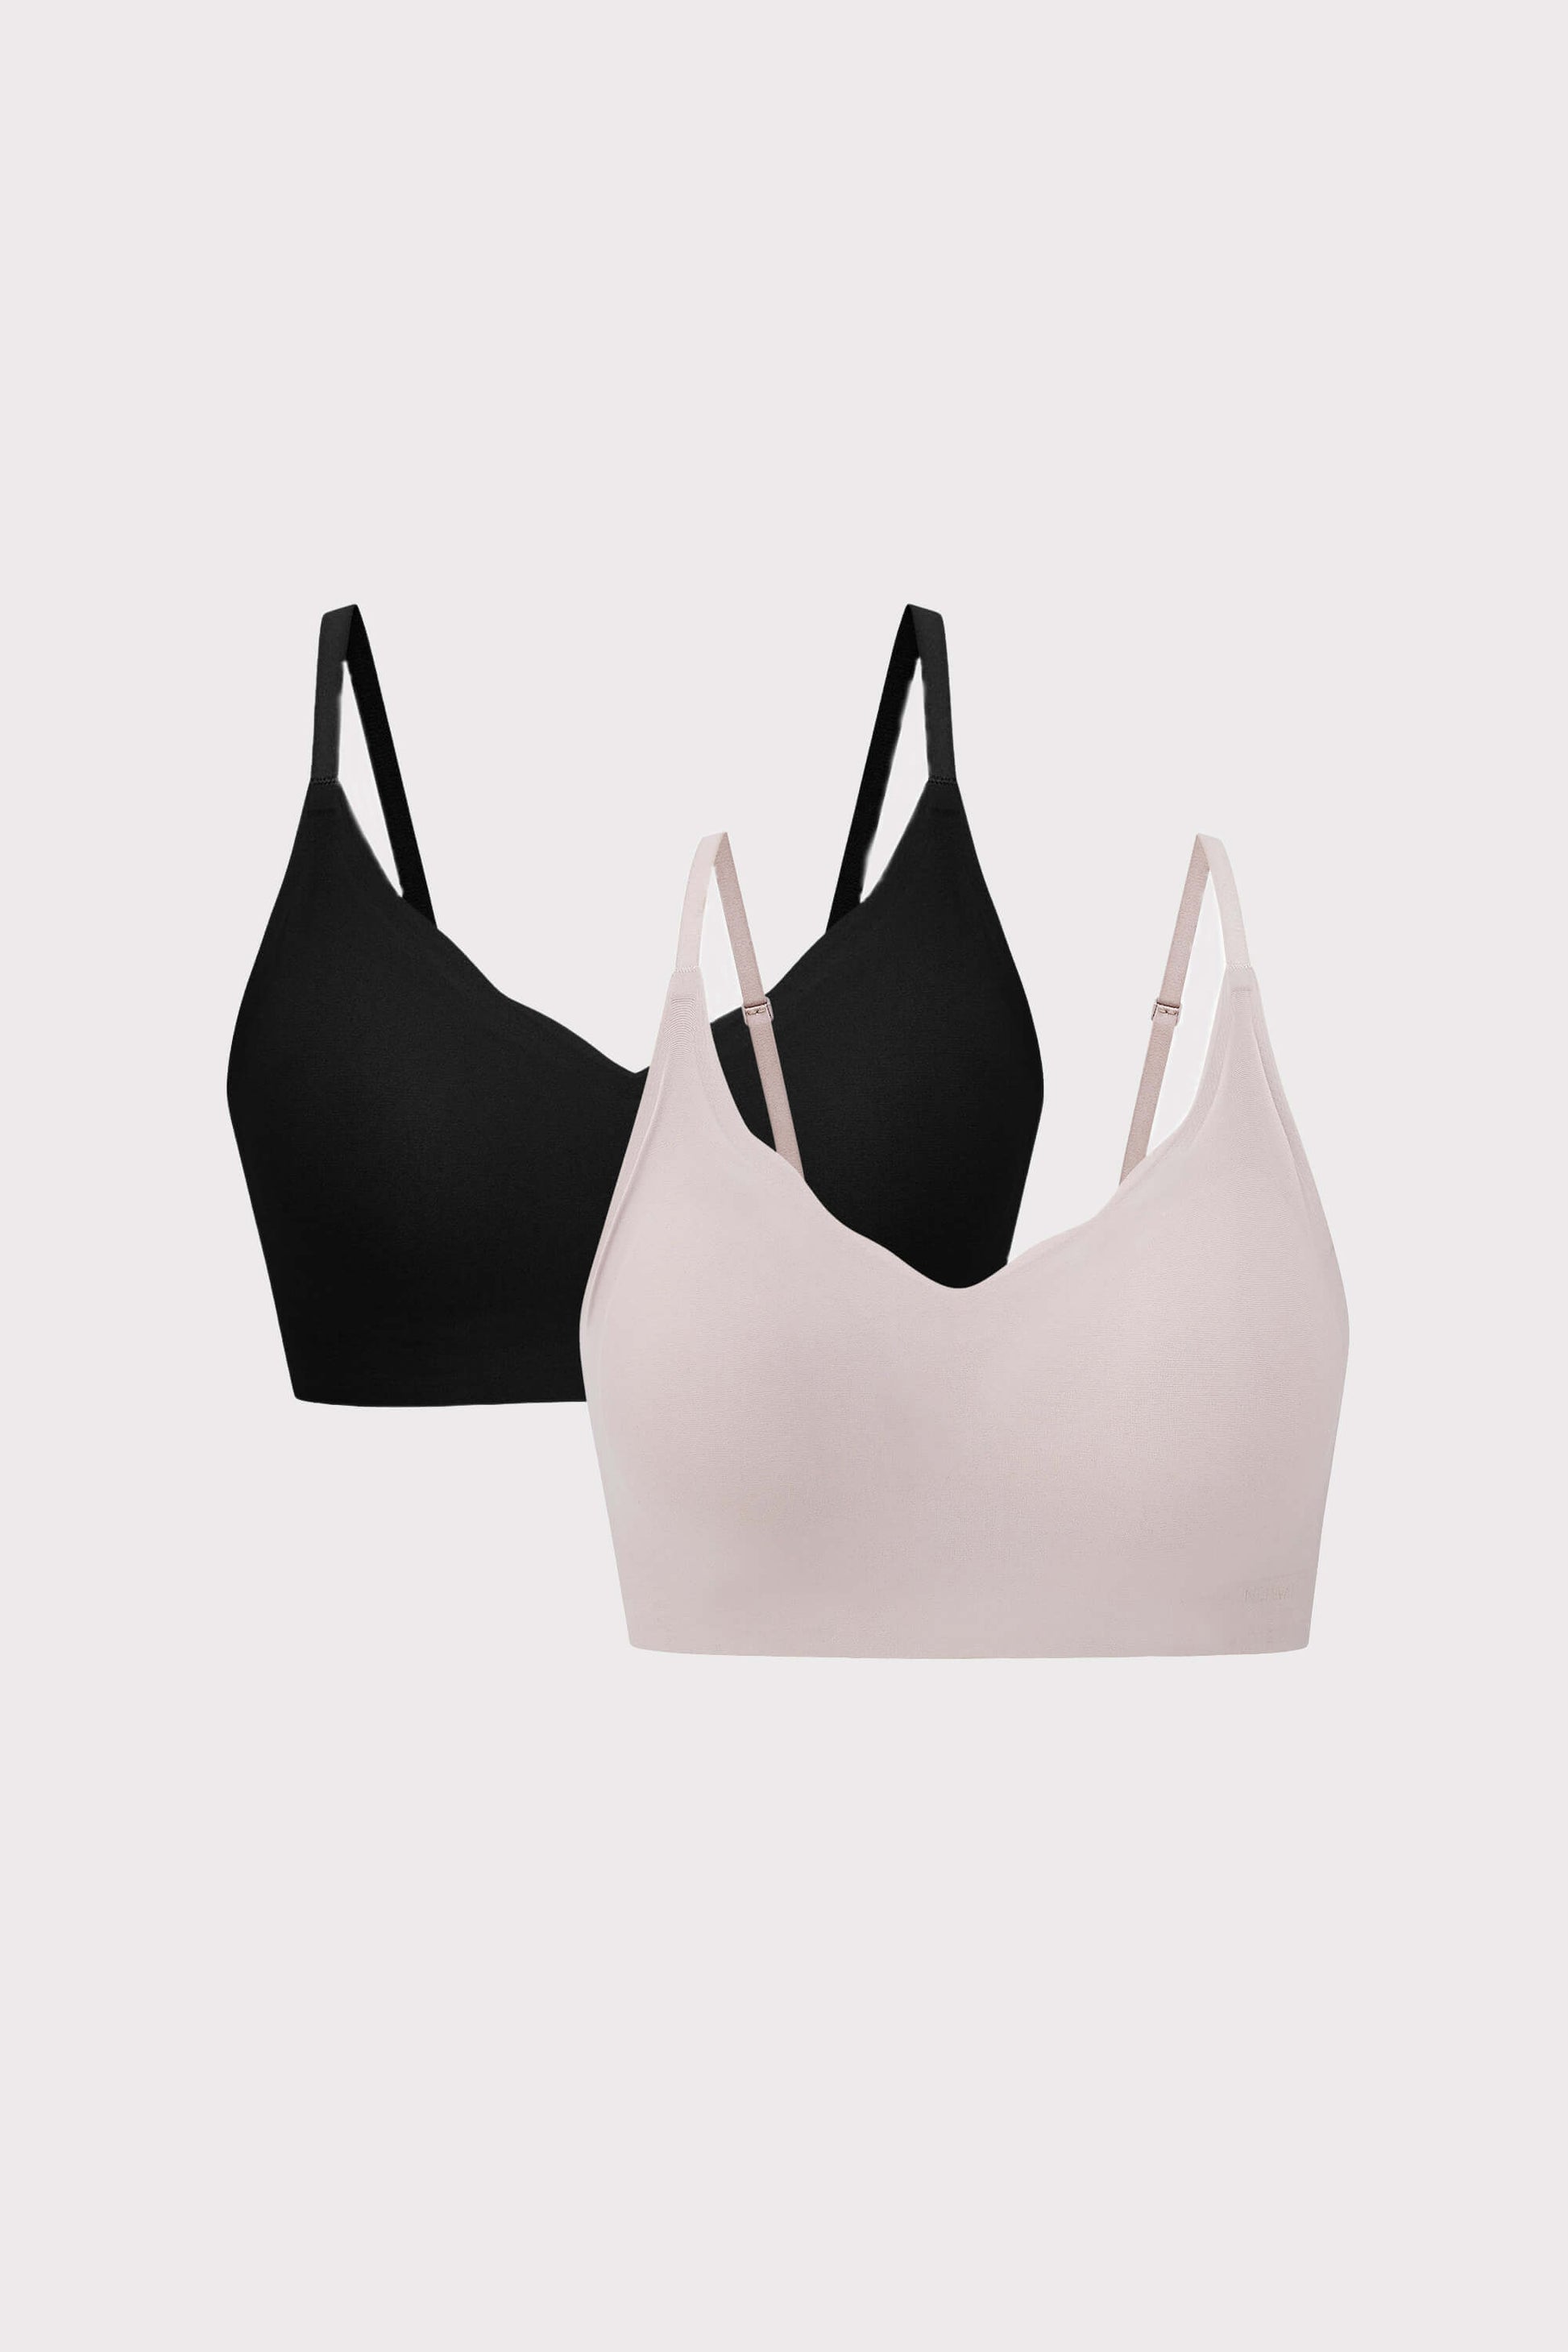 Neiwai-Inside and Outside Cloud Underwear for Female, Hug Cup, Soft Support  Bra, Fixed Cup, External